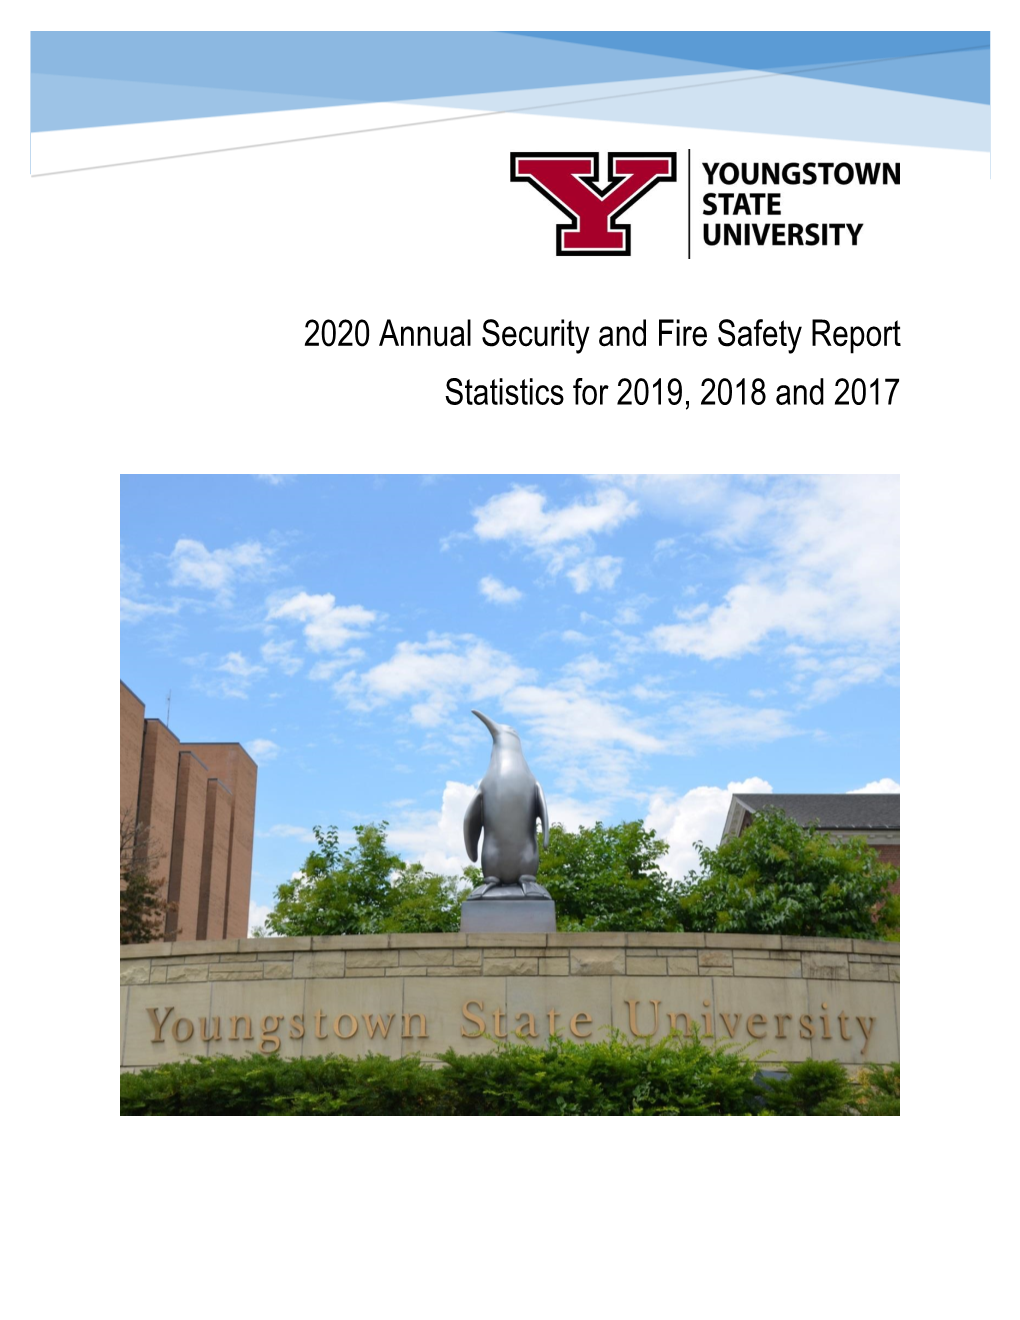 2020 Annual Security and Fire Safety Report Statistics for 2019, 2018 and 2017